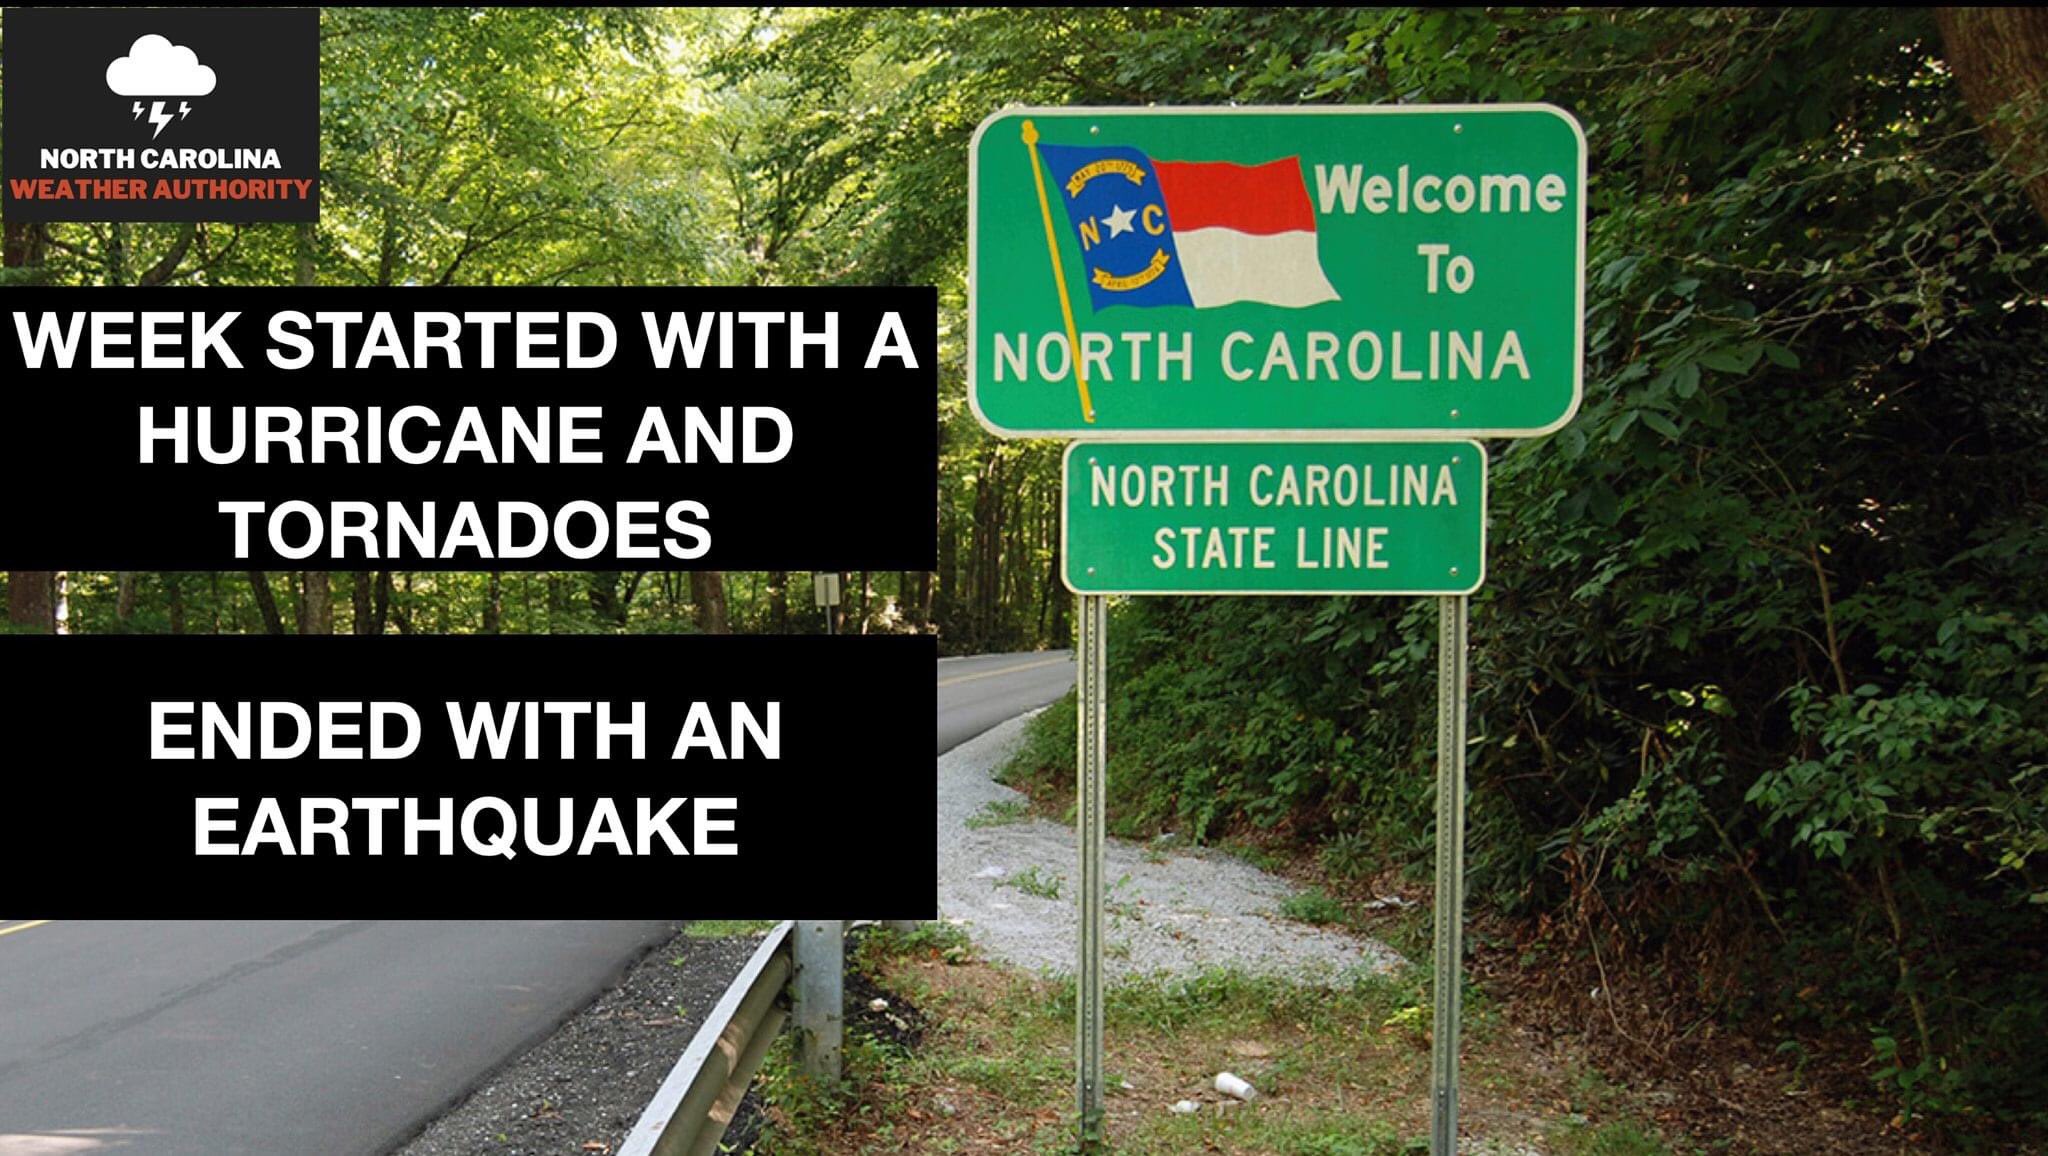 Magnitude 5.1 earthquake hits NC, most powerful quake has seen in over 100 years